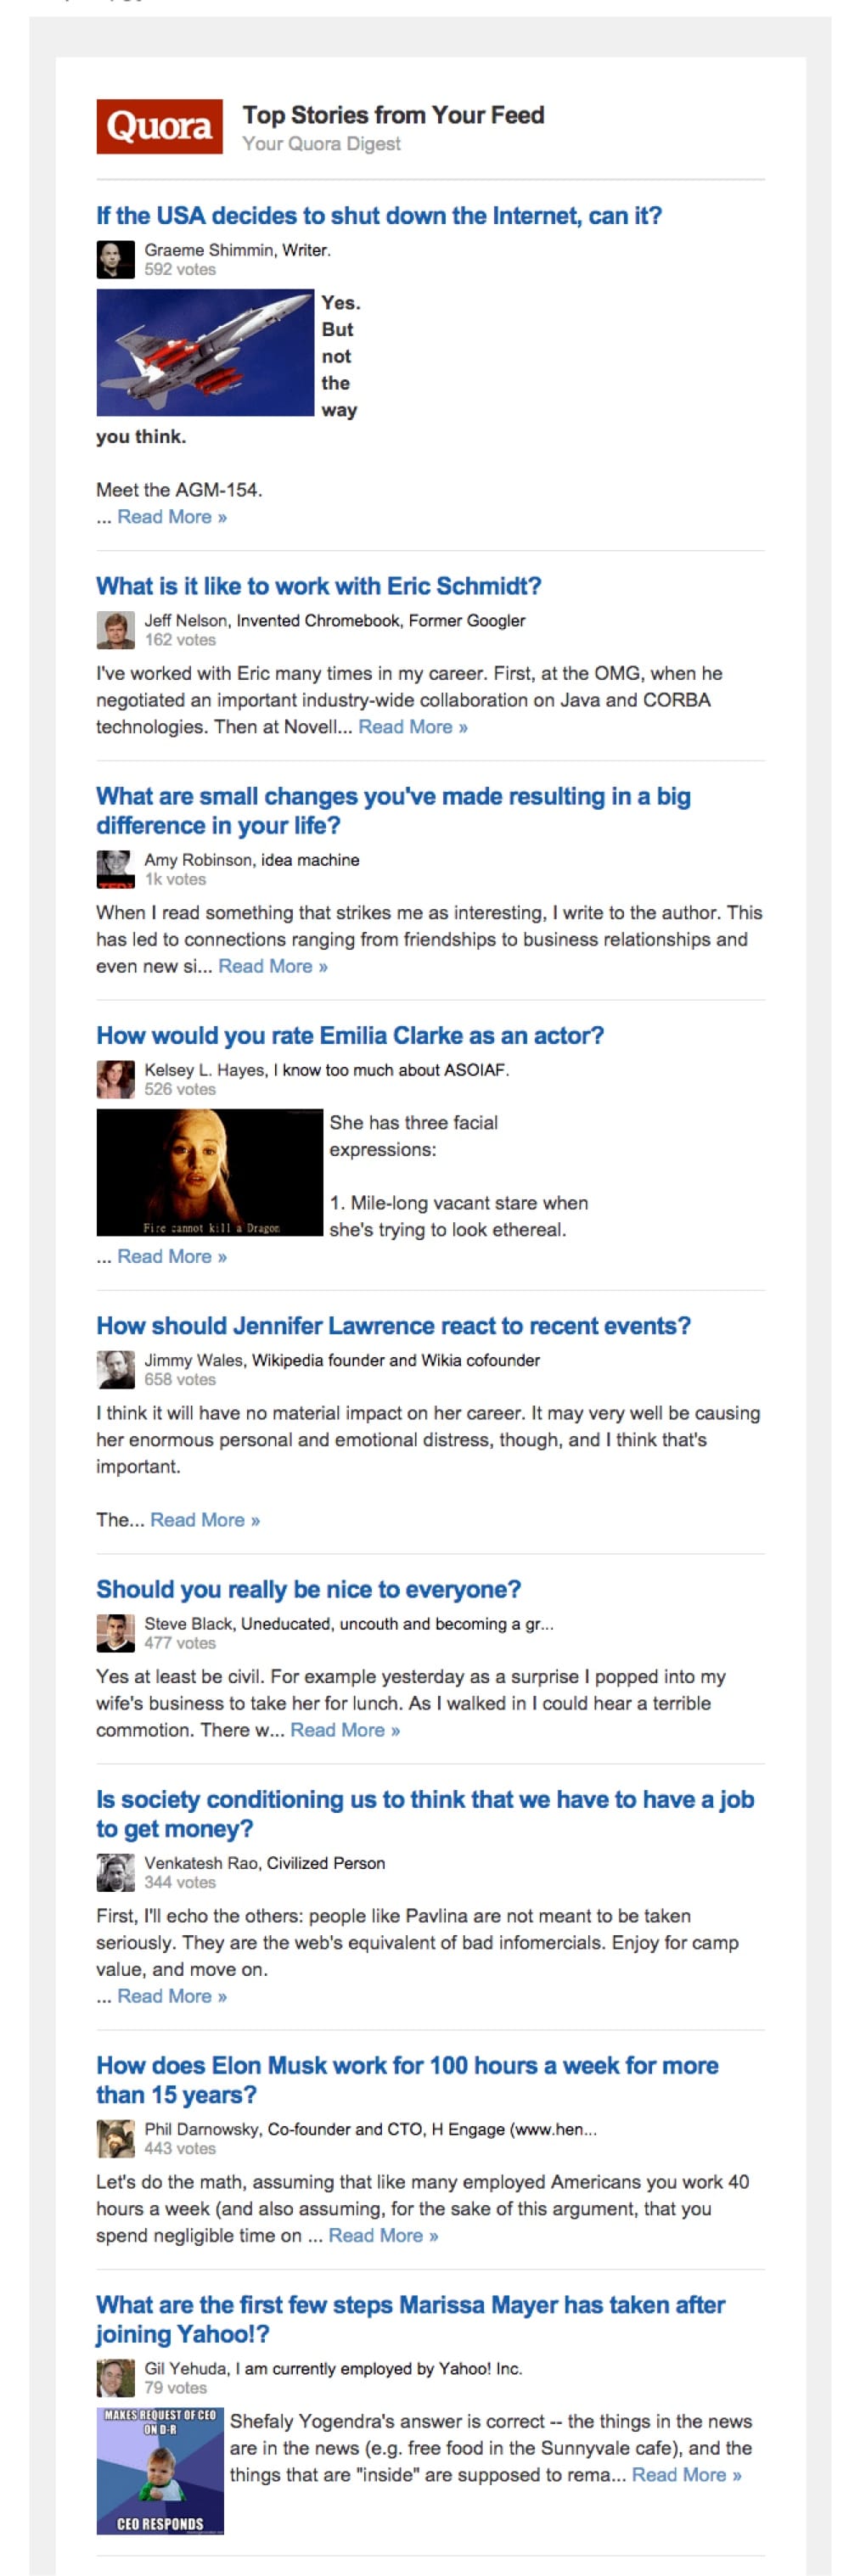 promotional email example quora